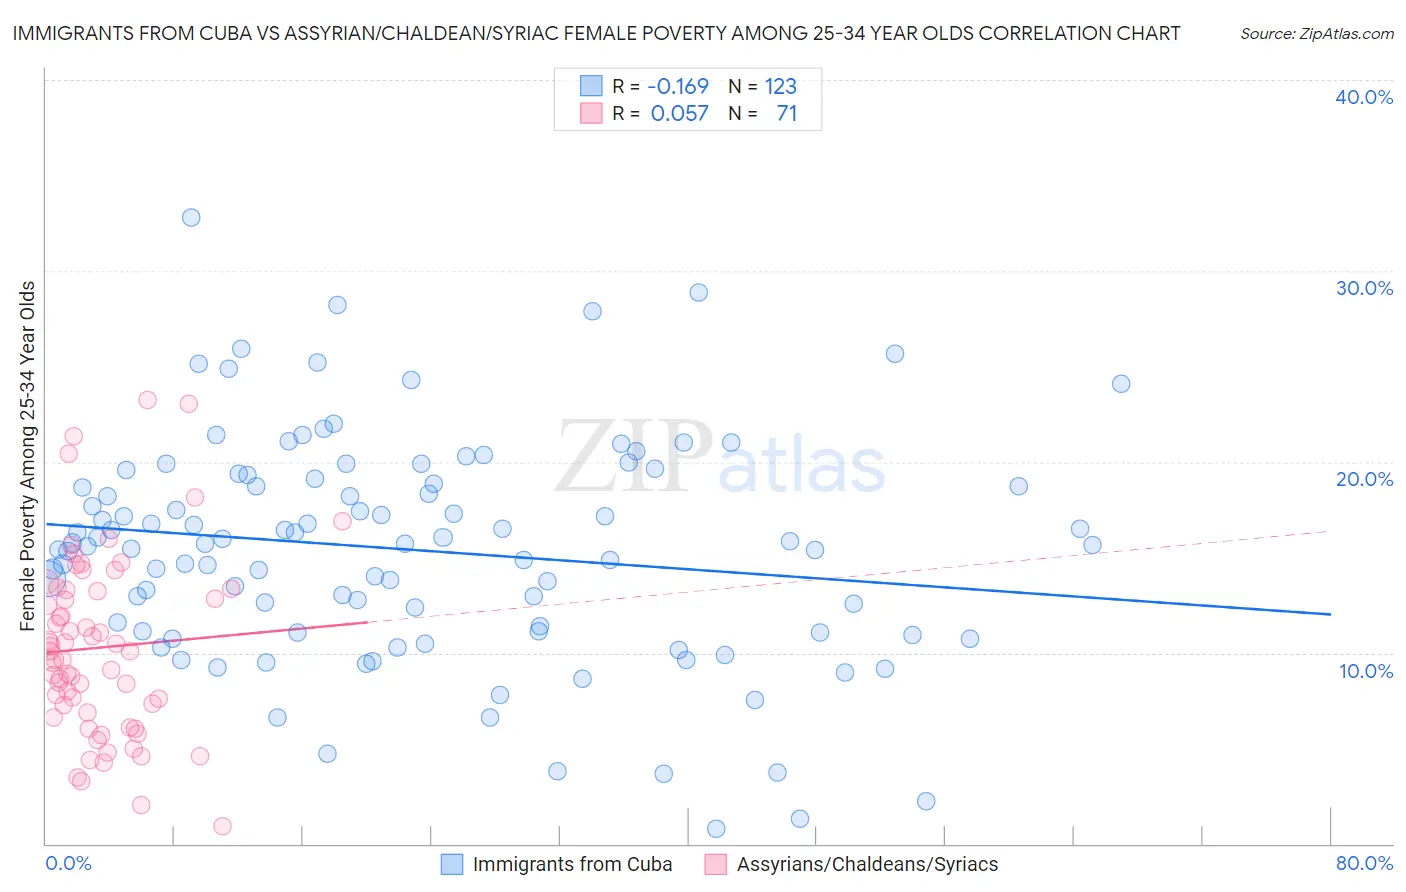 Immigrants from Cuba vs Assyrian/Chaldean/Syriac Female Poverty Among 25-34 Year Olds